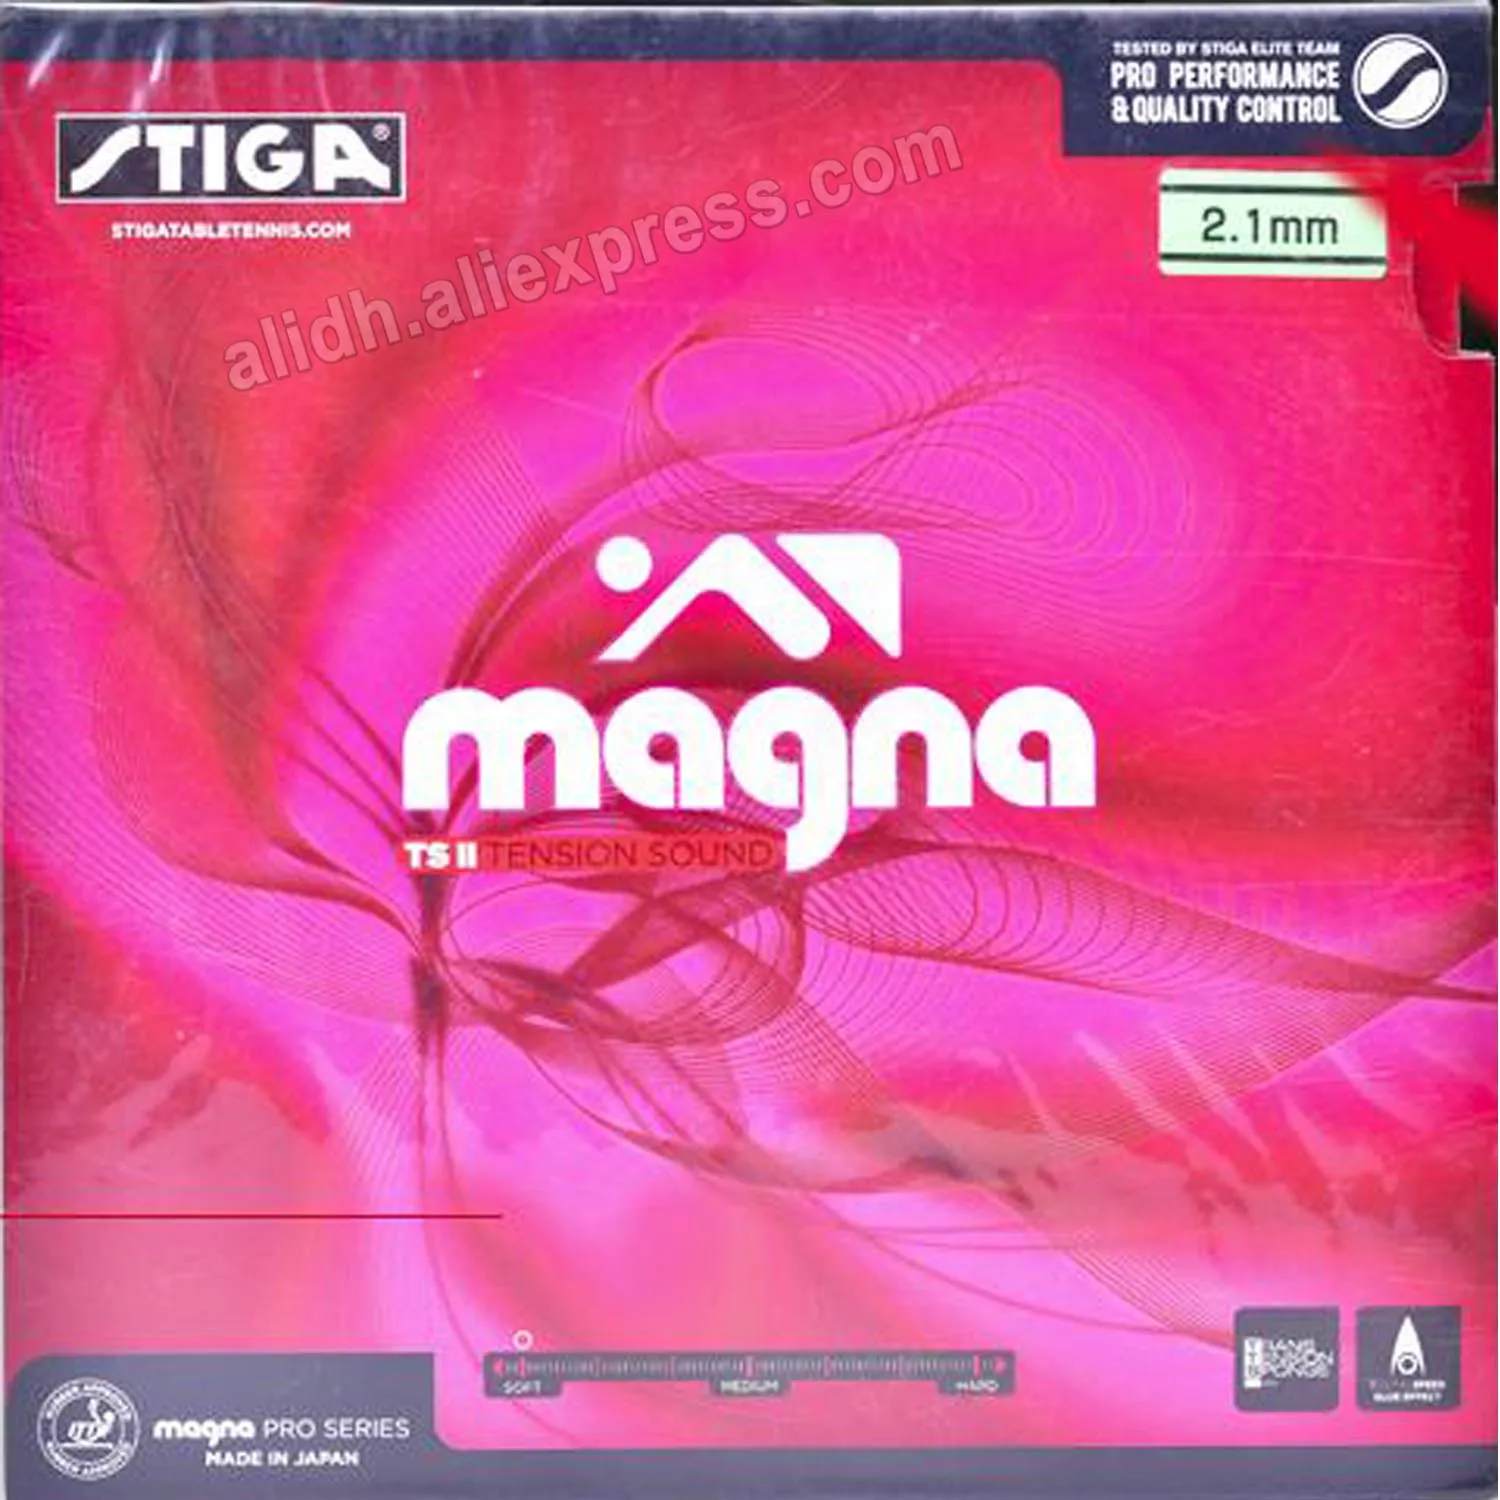 Original Stiga MAGNA TS II ( MAGNA TS 2) soft pimples in table tennis rubber for table tennis rackets racquet sports pingpong